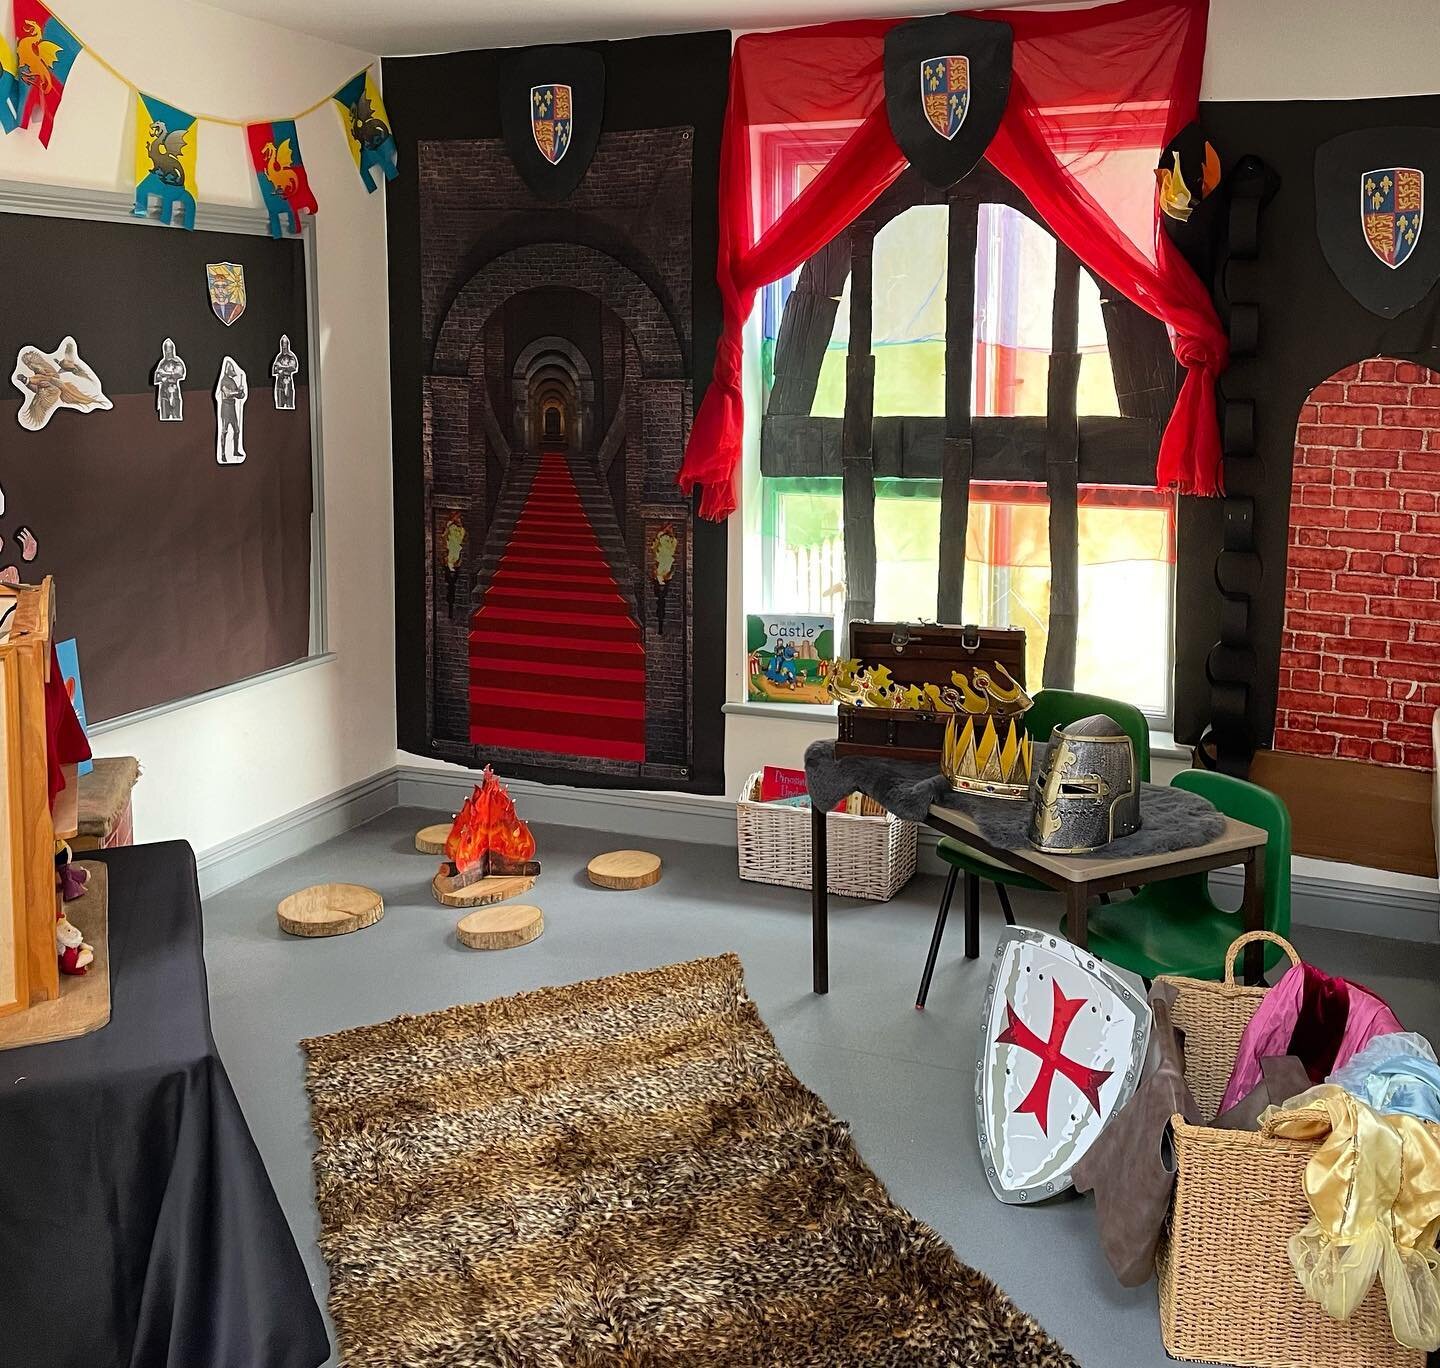 Now we all know we love a good role play area at Constantine Pre-School but this has got to be one of the best yet! Ready to deep dive into Medieval England next week.  #constantinepreschool #eyfsclassroom #learningthroughplay #medievalengland #histo